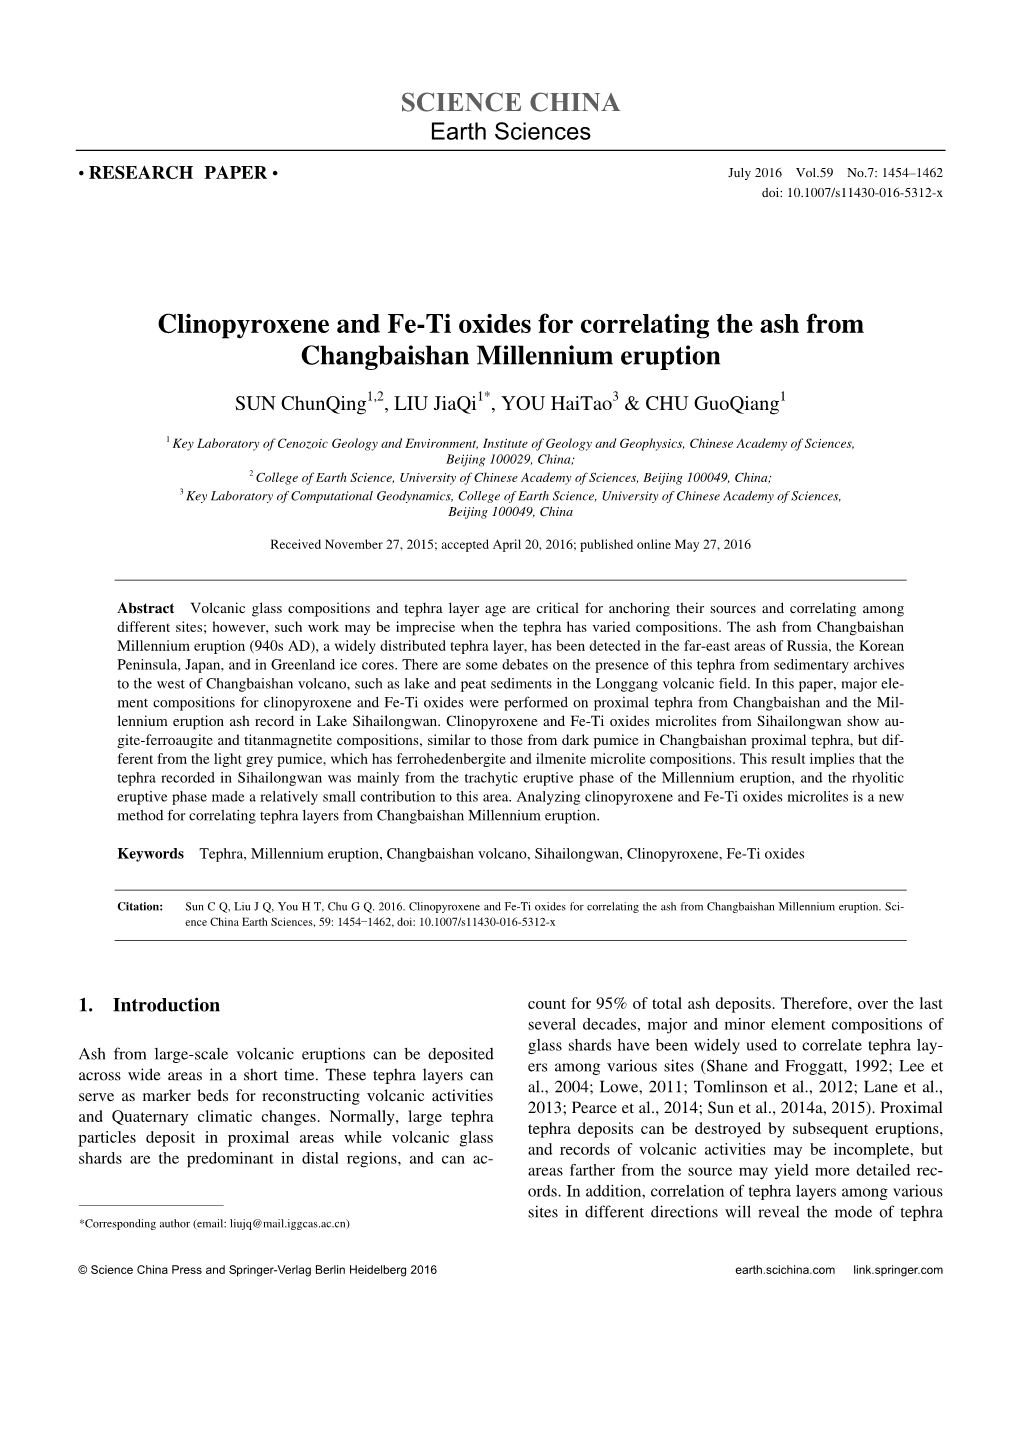 SCIENCE CHINA Clinopyroxene and Fe-Ti Oxides for Correlating the Ash